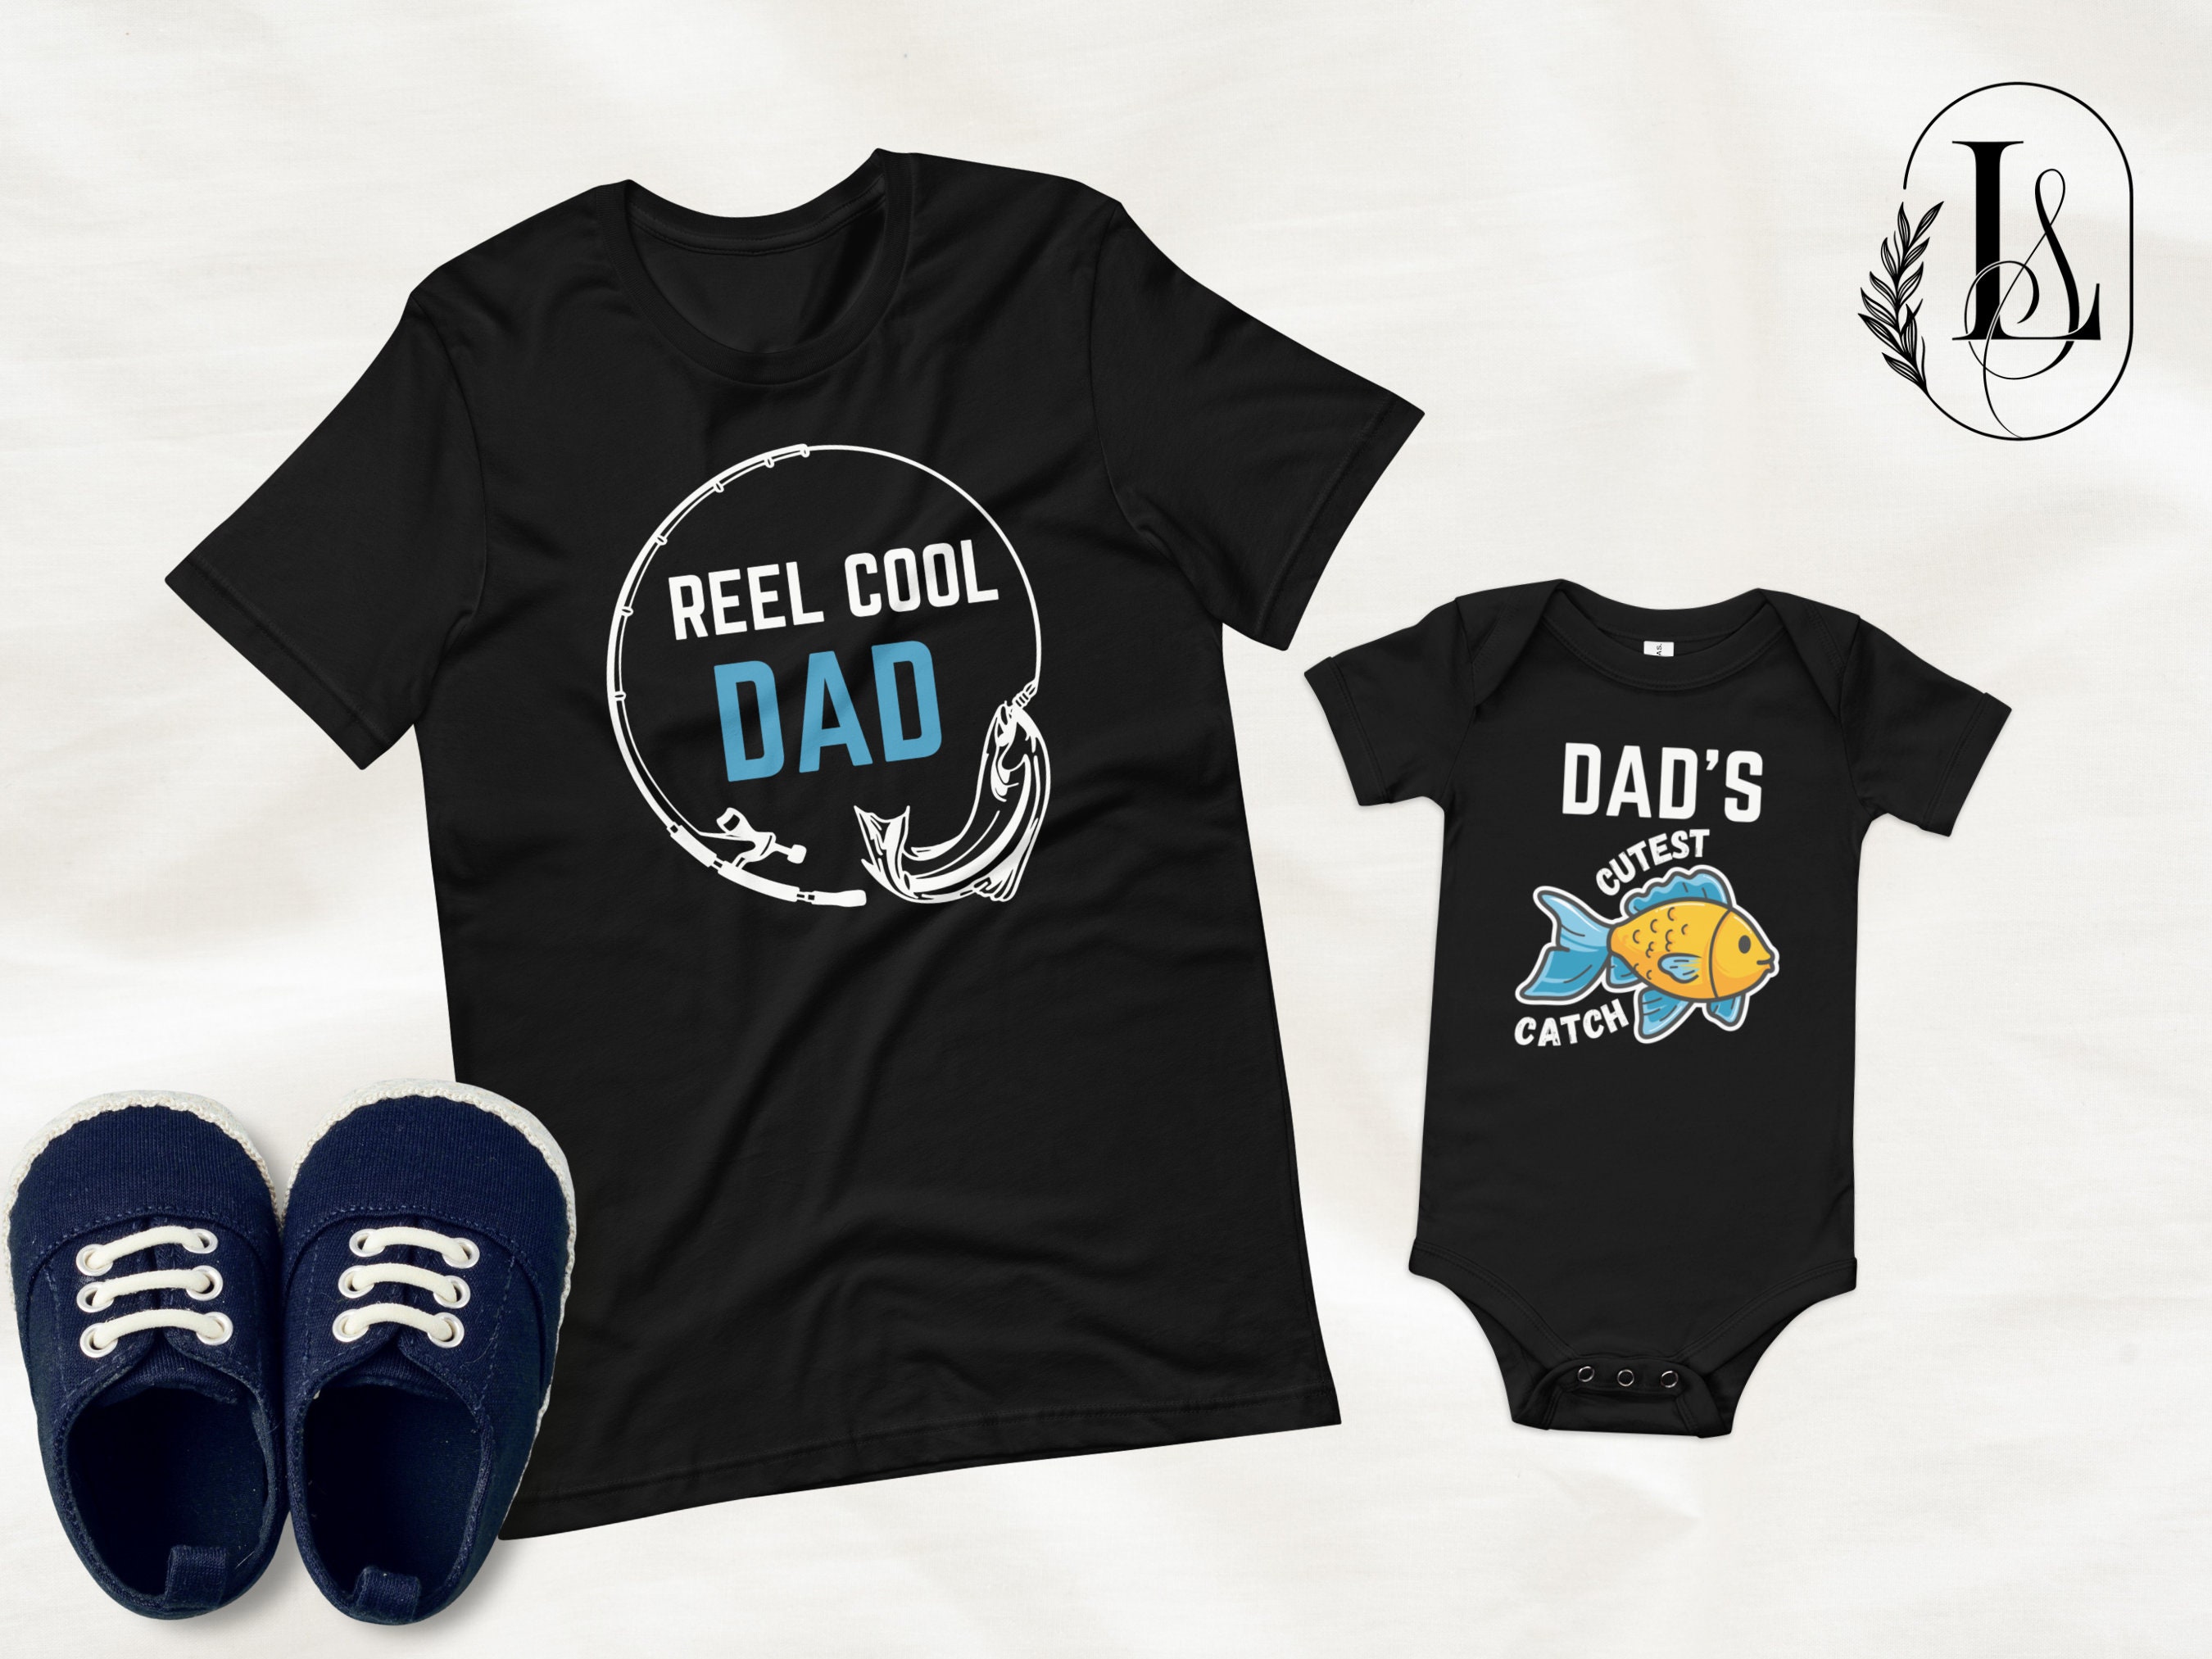 Buy Fishing Father Son Matching Shirts, Dad and Son Matching Tee